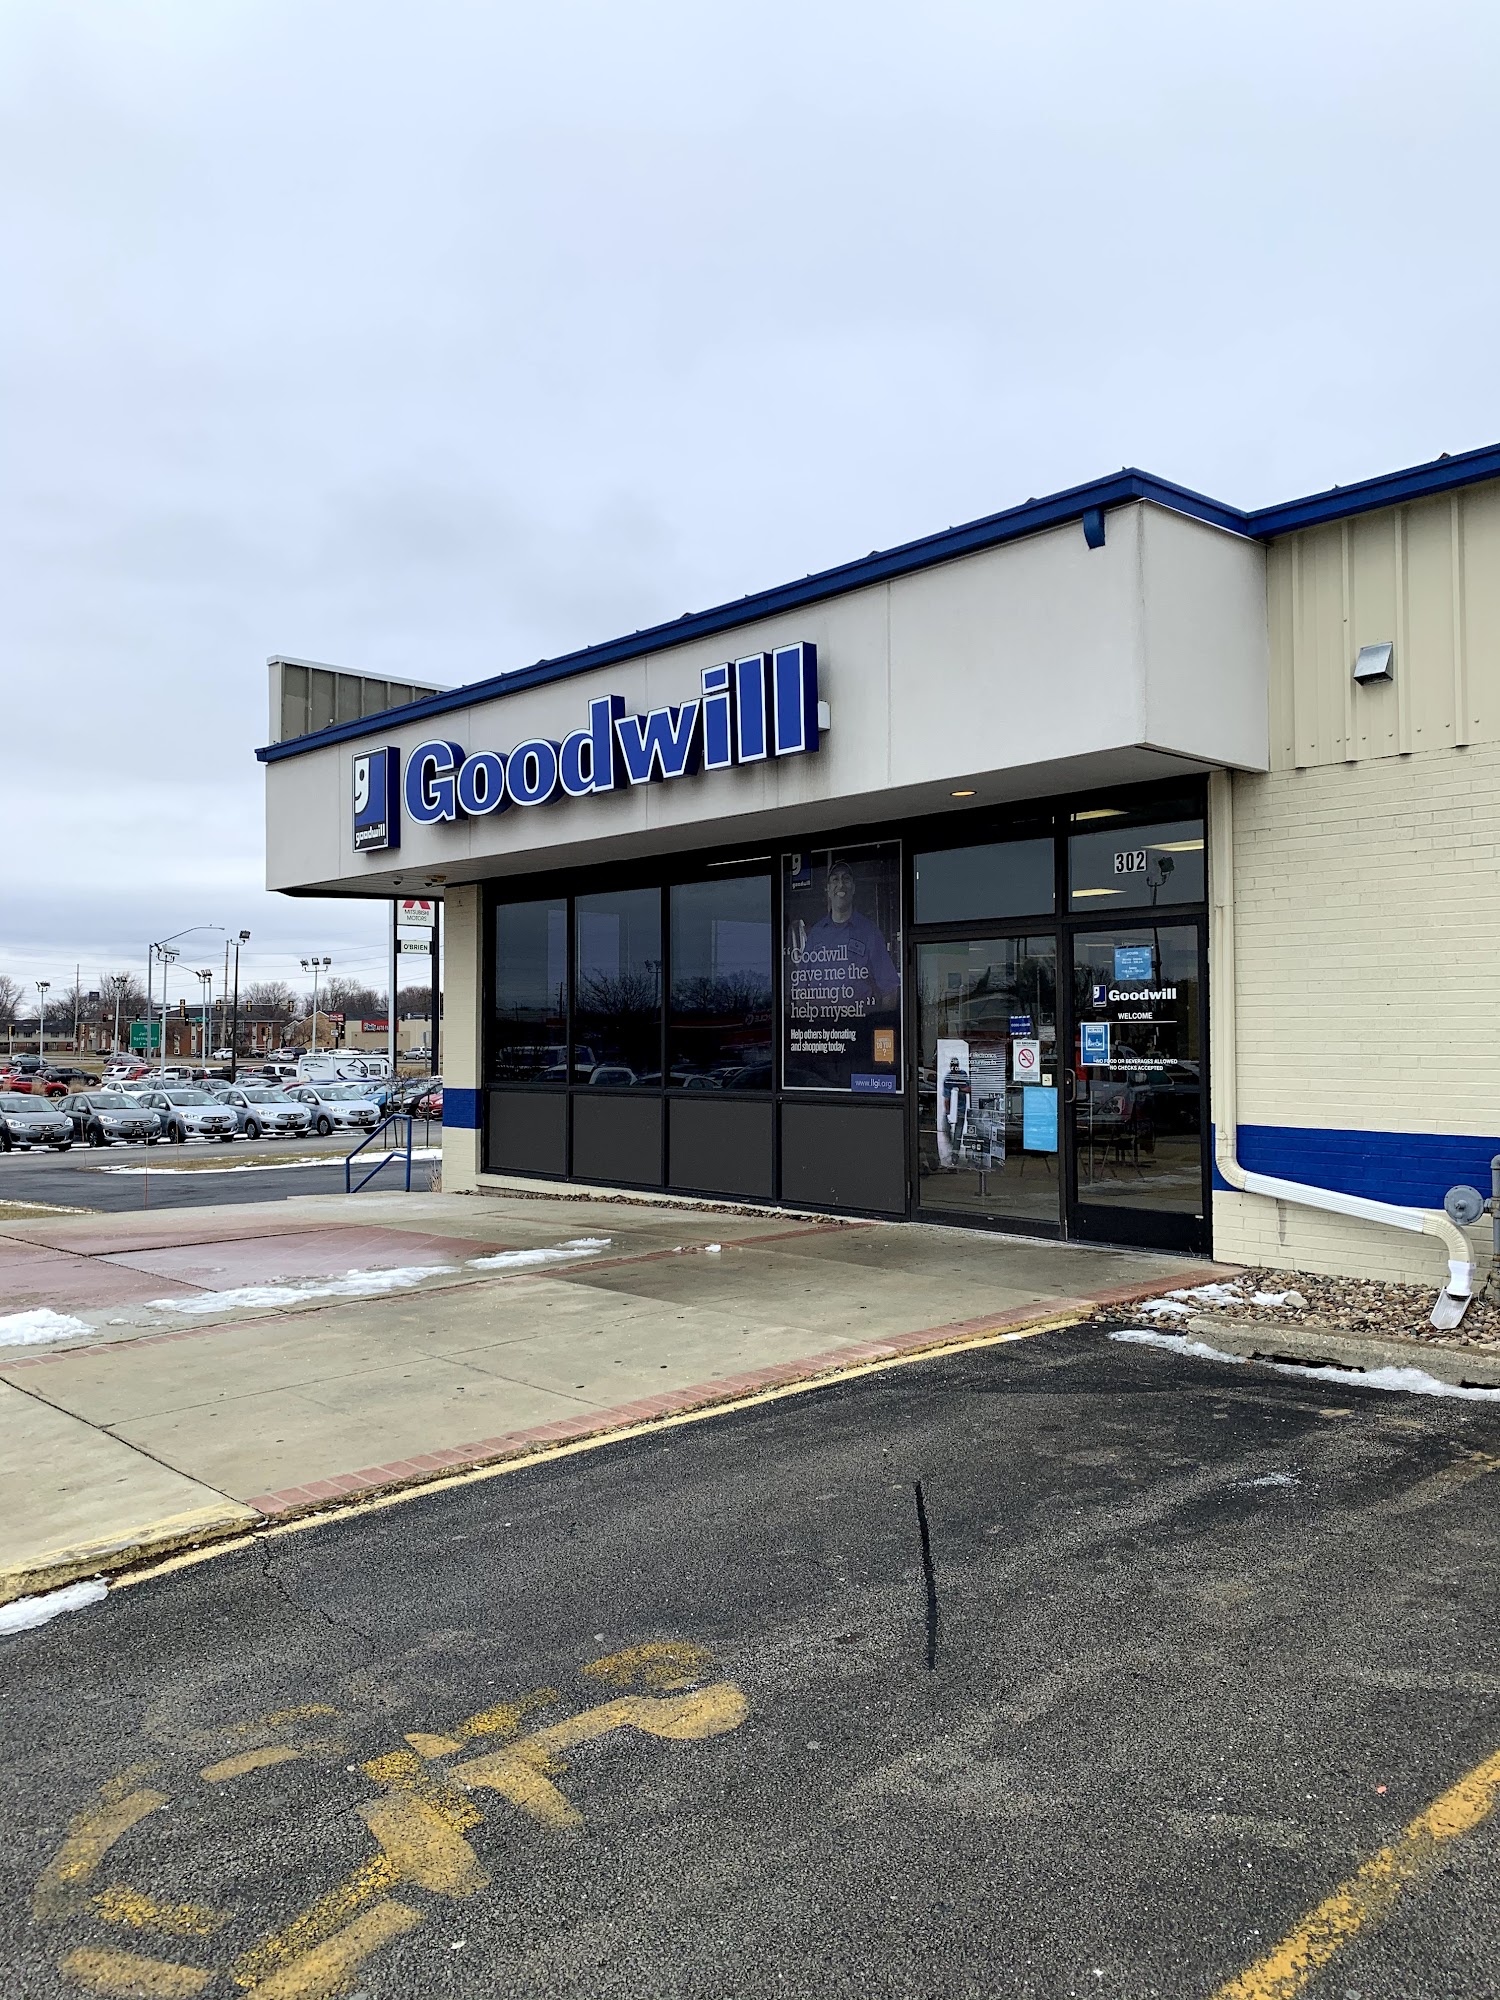 Goodwill Bloomington-Normal IL - Land of Lincoln Goodwill Industries